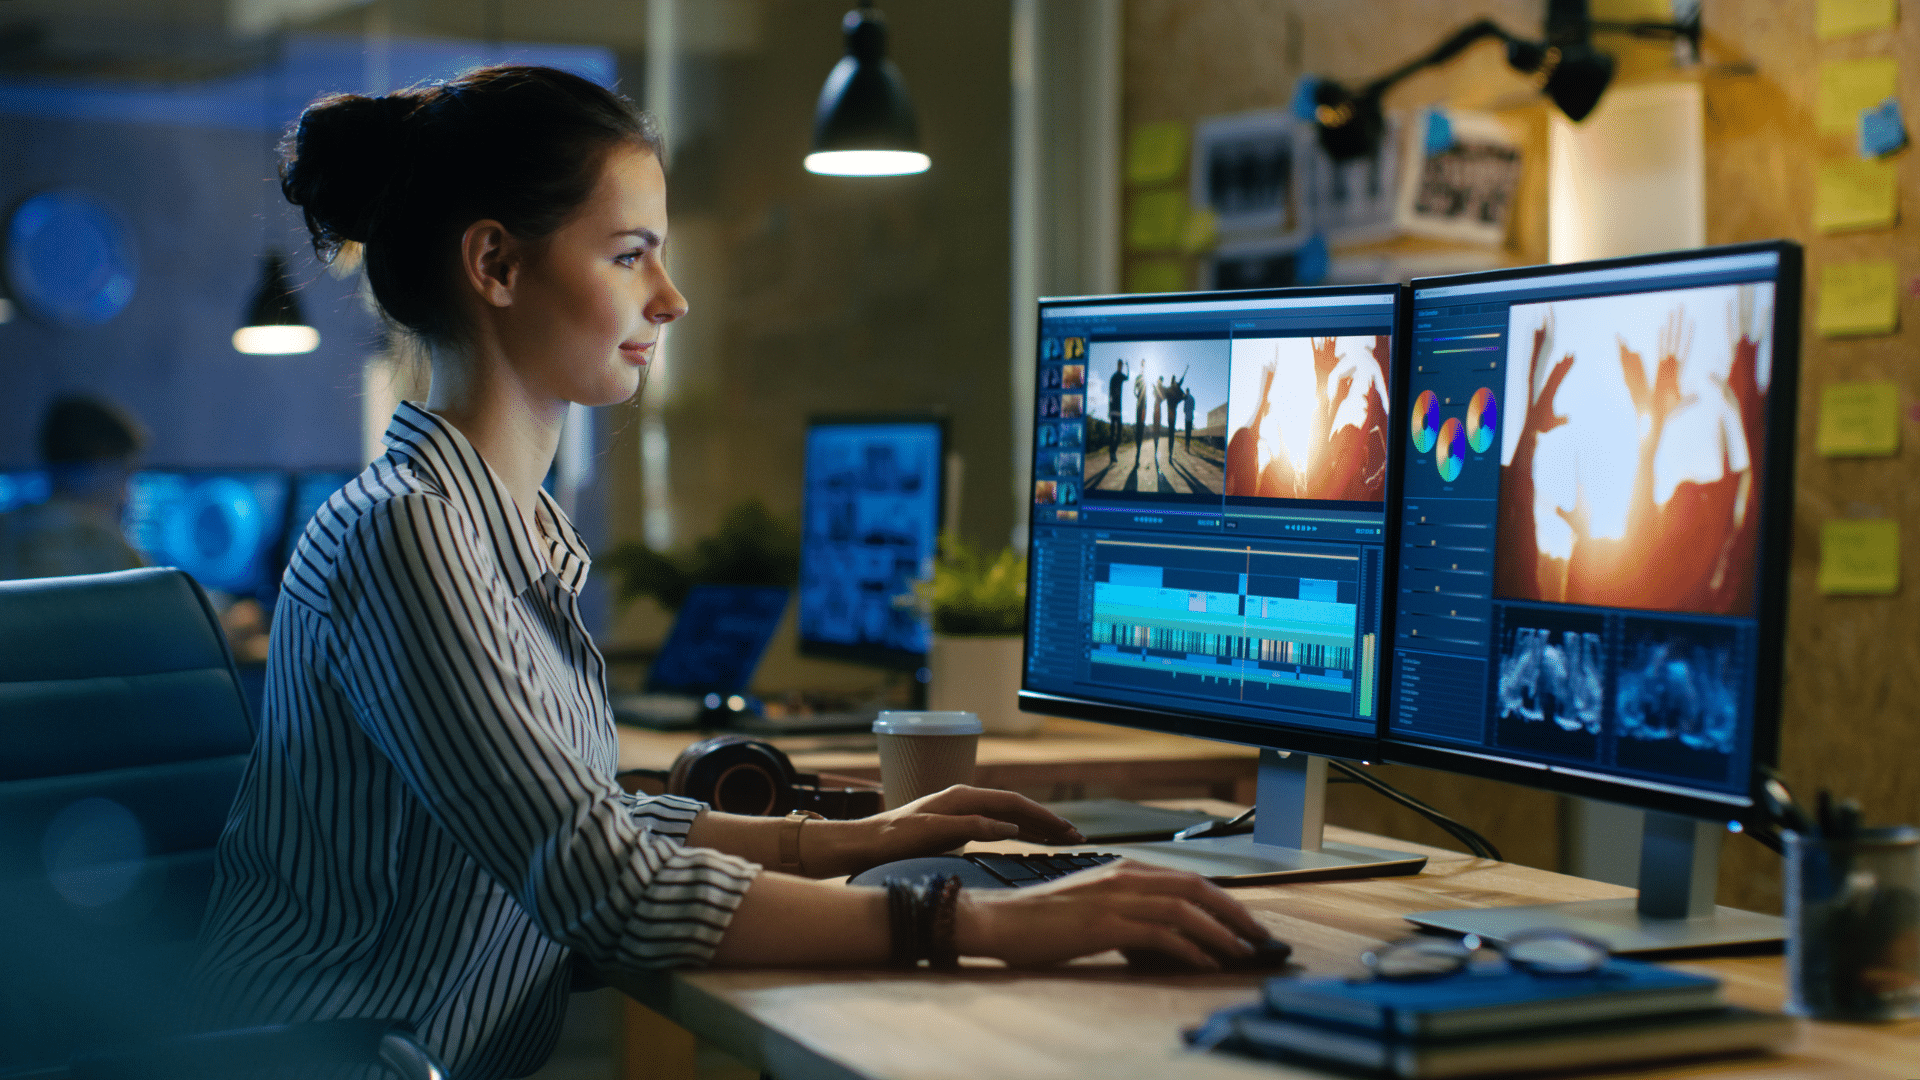 Women video editing at night - The Top 3 AI Video Marketing Tools That are Revolutionizing the Industry